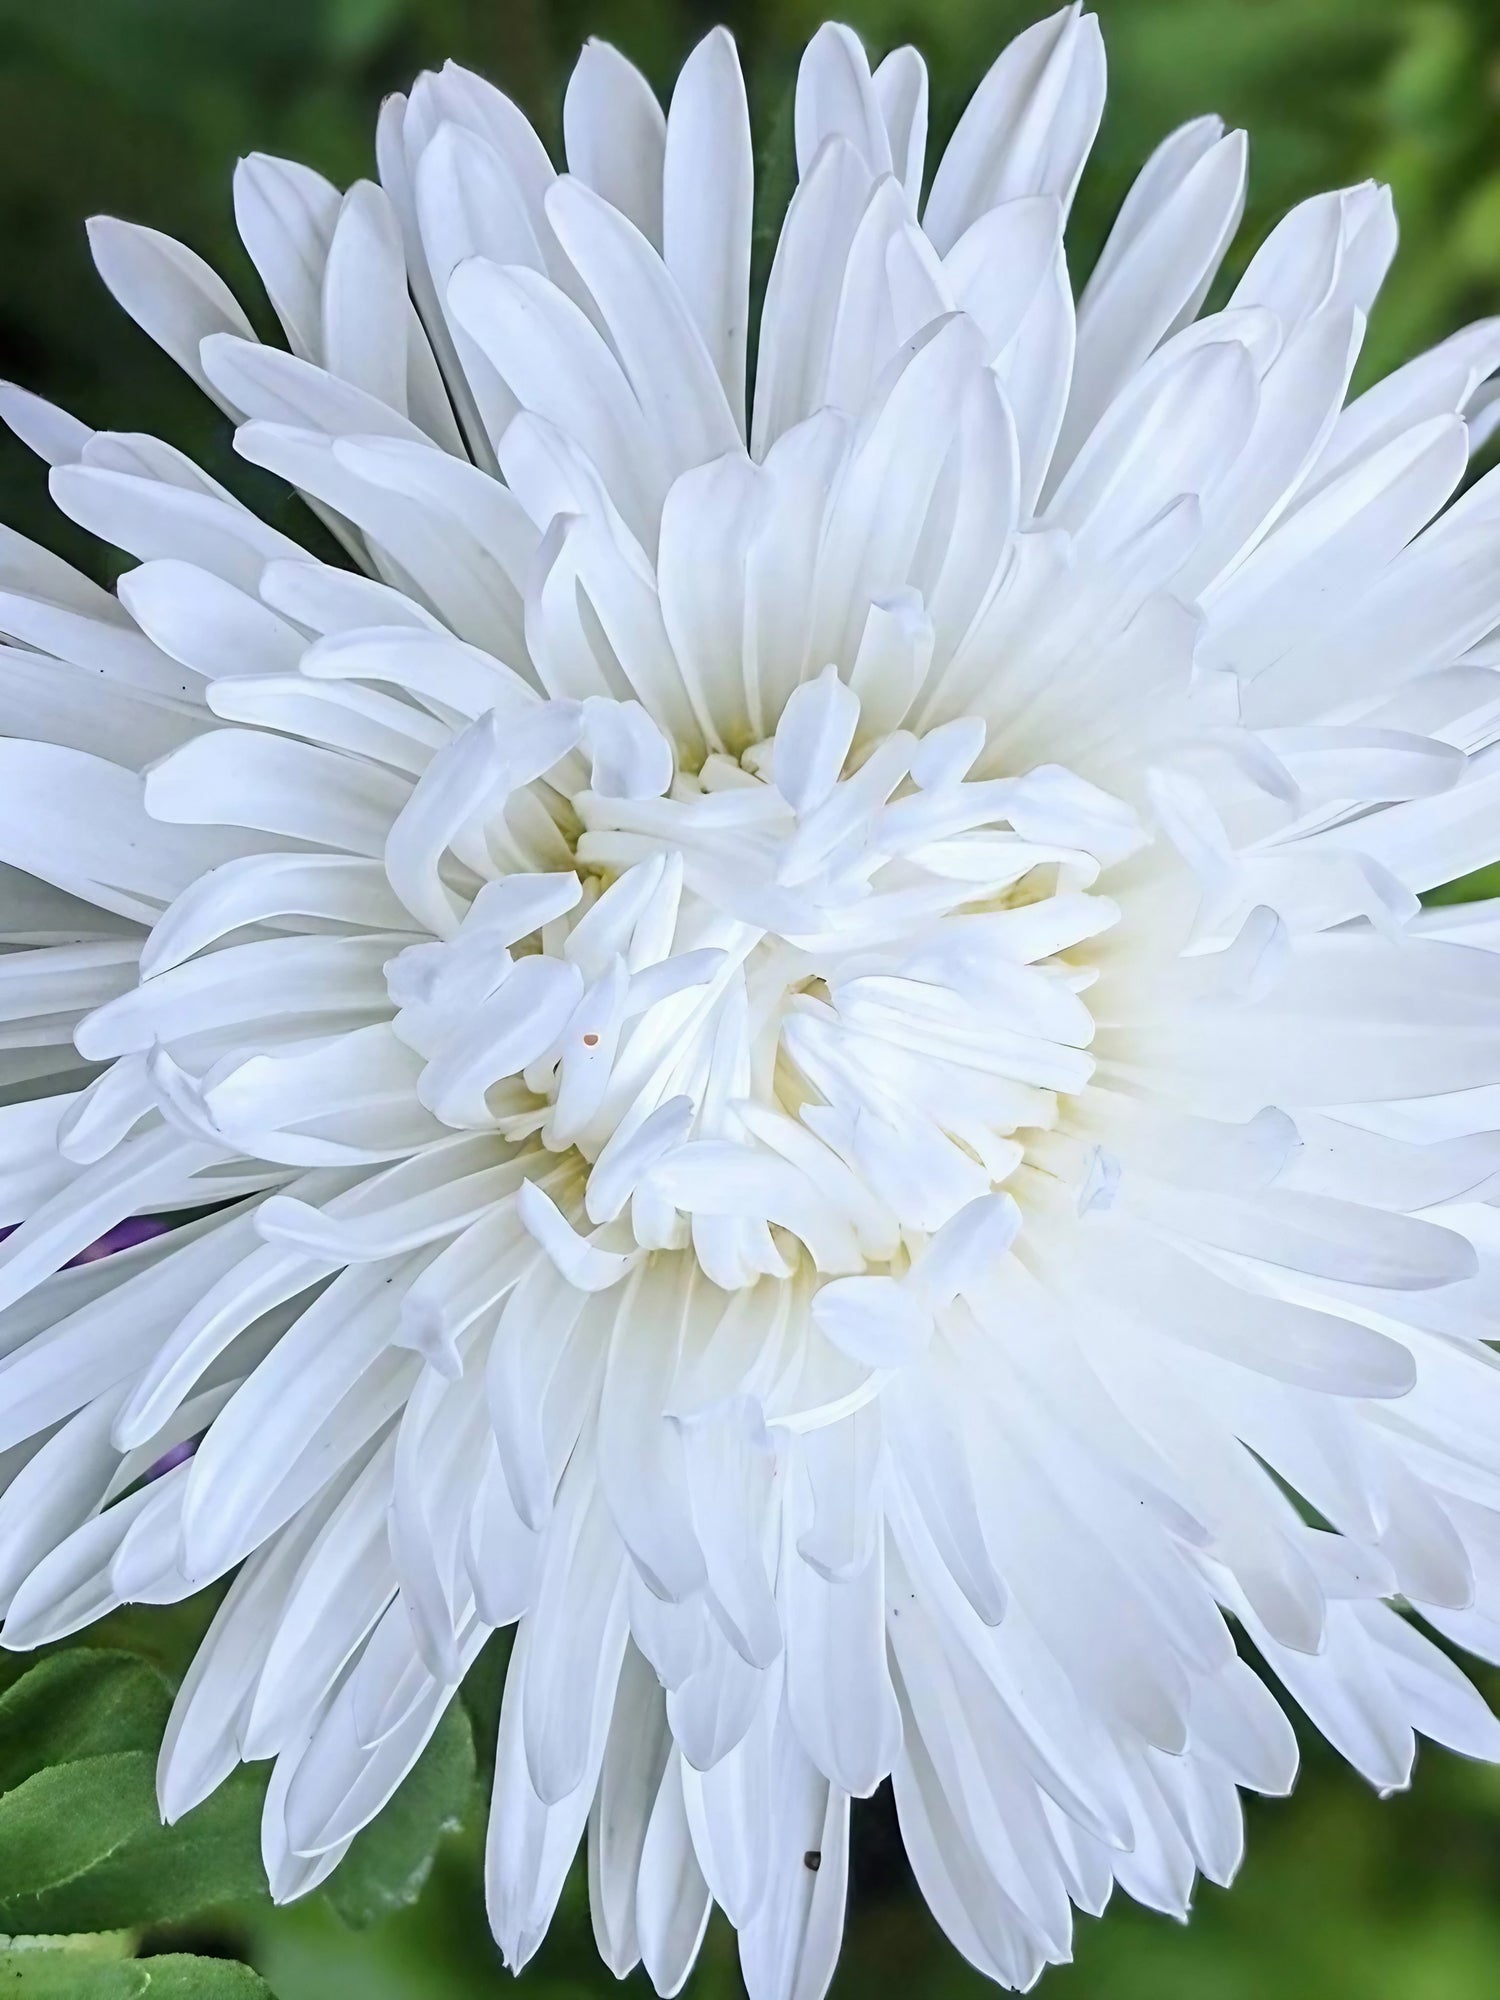 The large center of a white Aster Duchess bloom